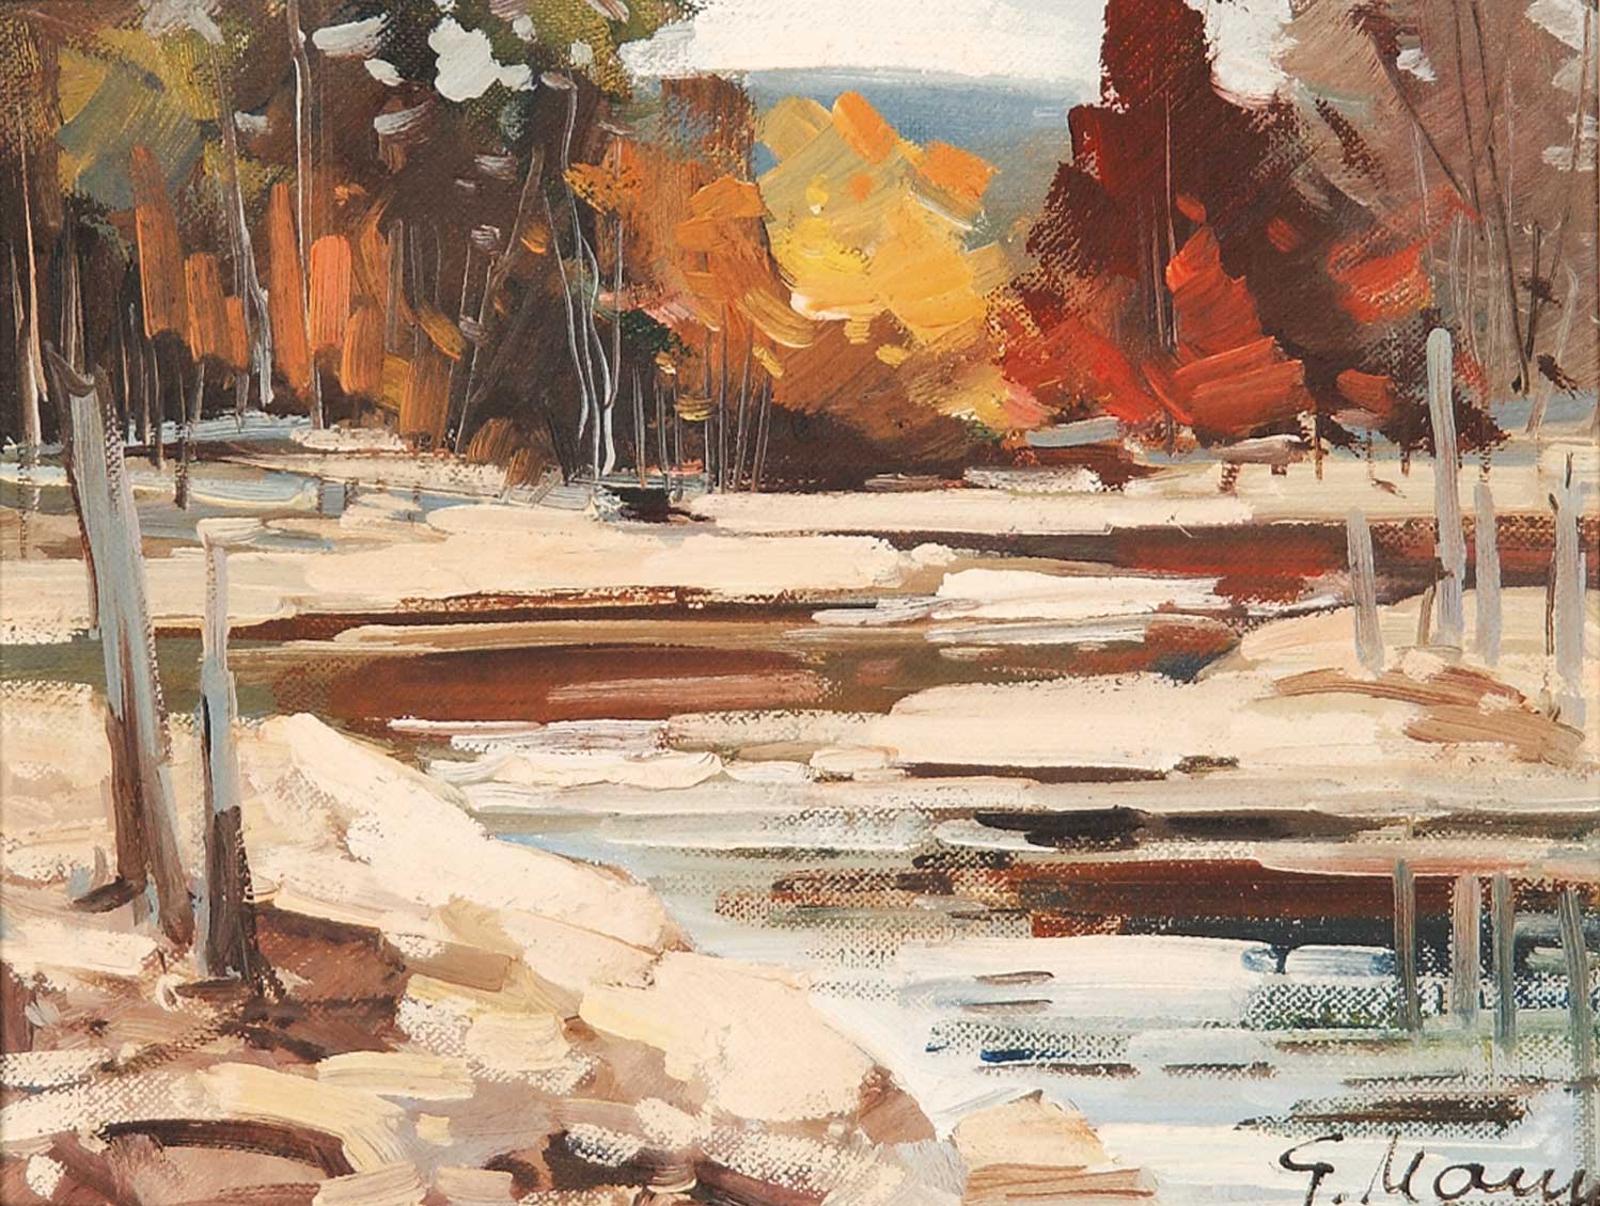 Geza (Gordon) Marich (1913-1985) - Untitled - River Bend and Trees